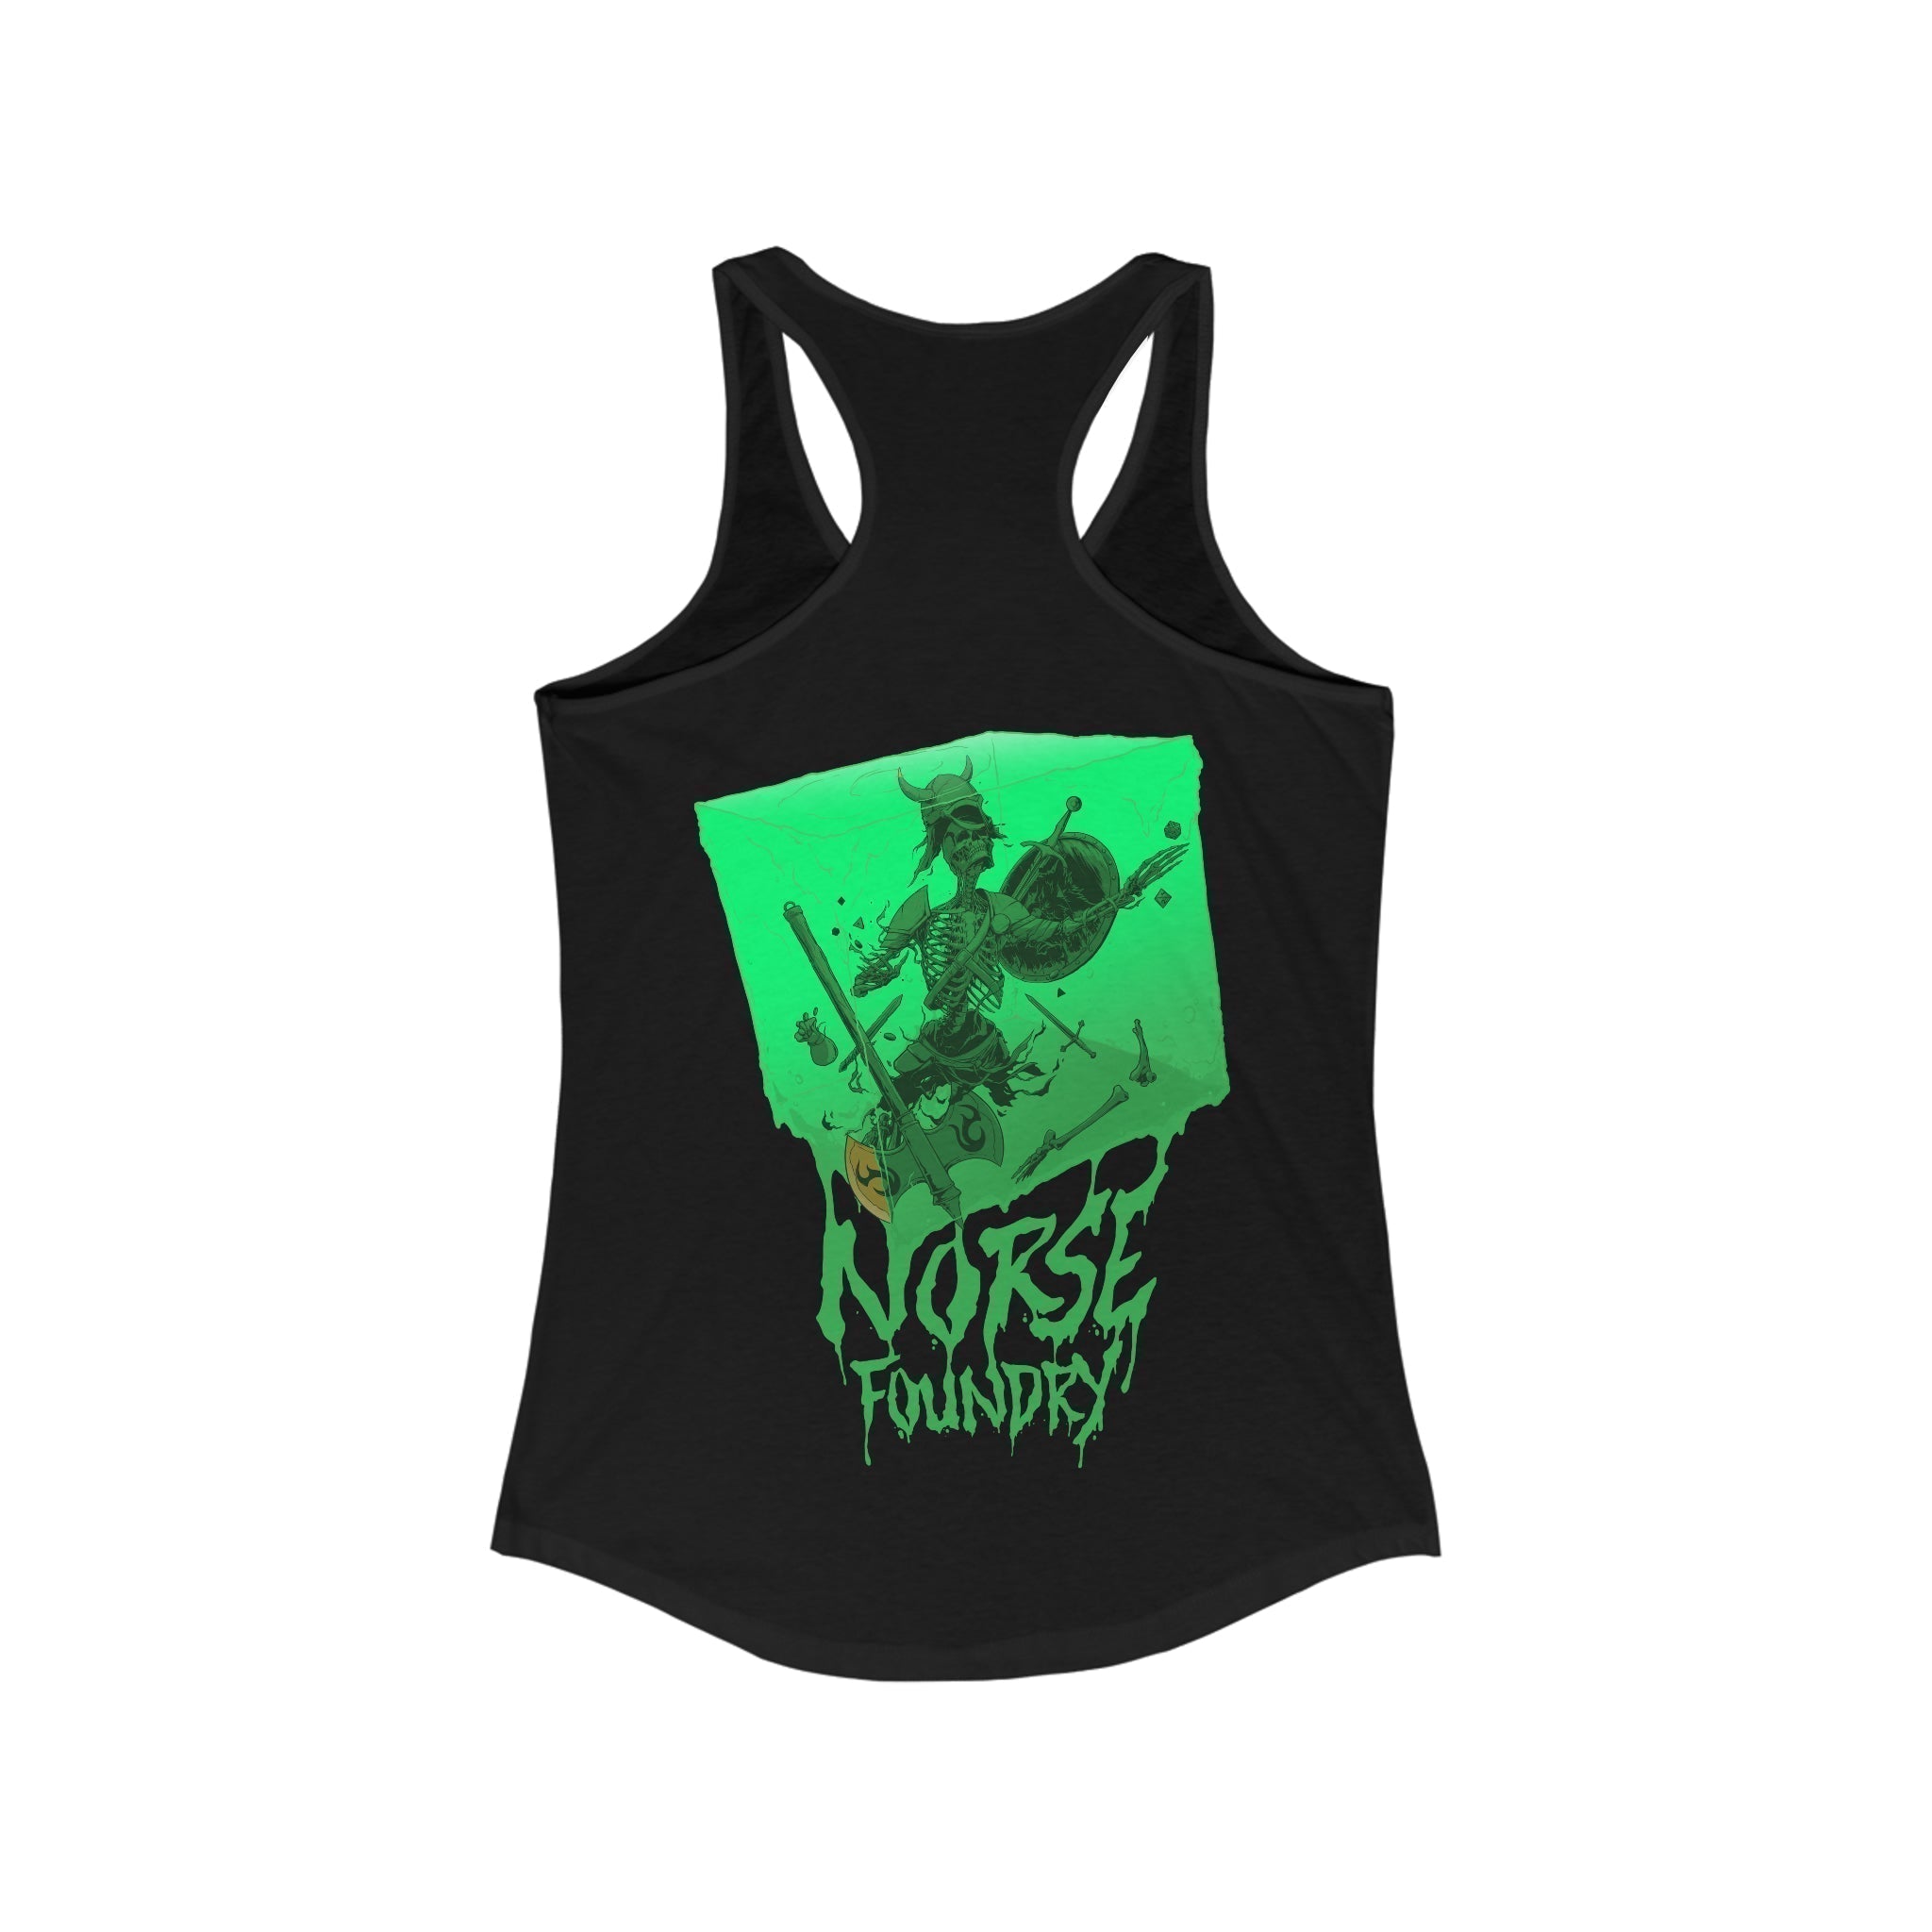 Cube - Norse Foundry Women's Tank Top - 49237120168455777777